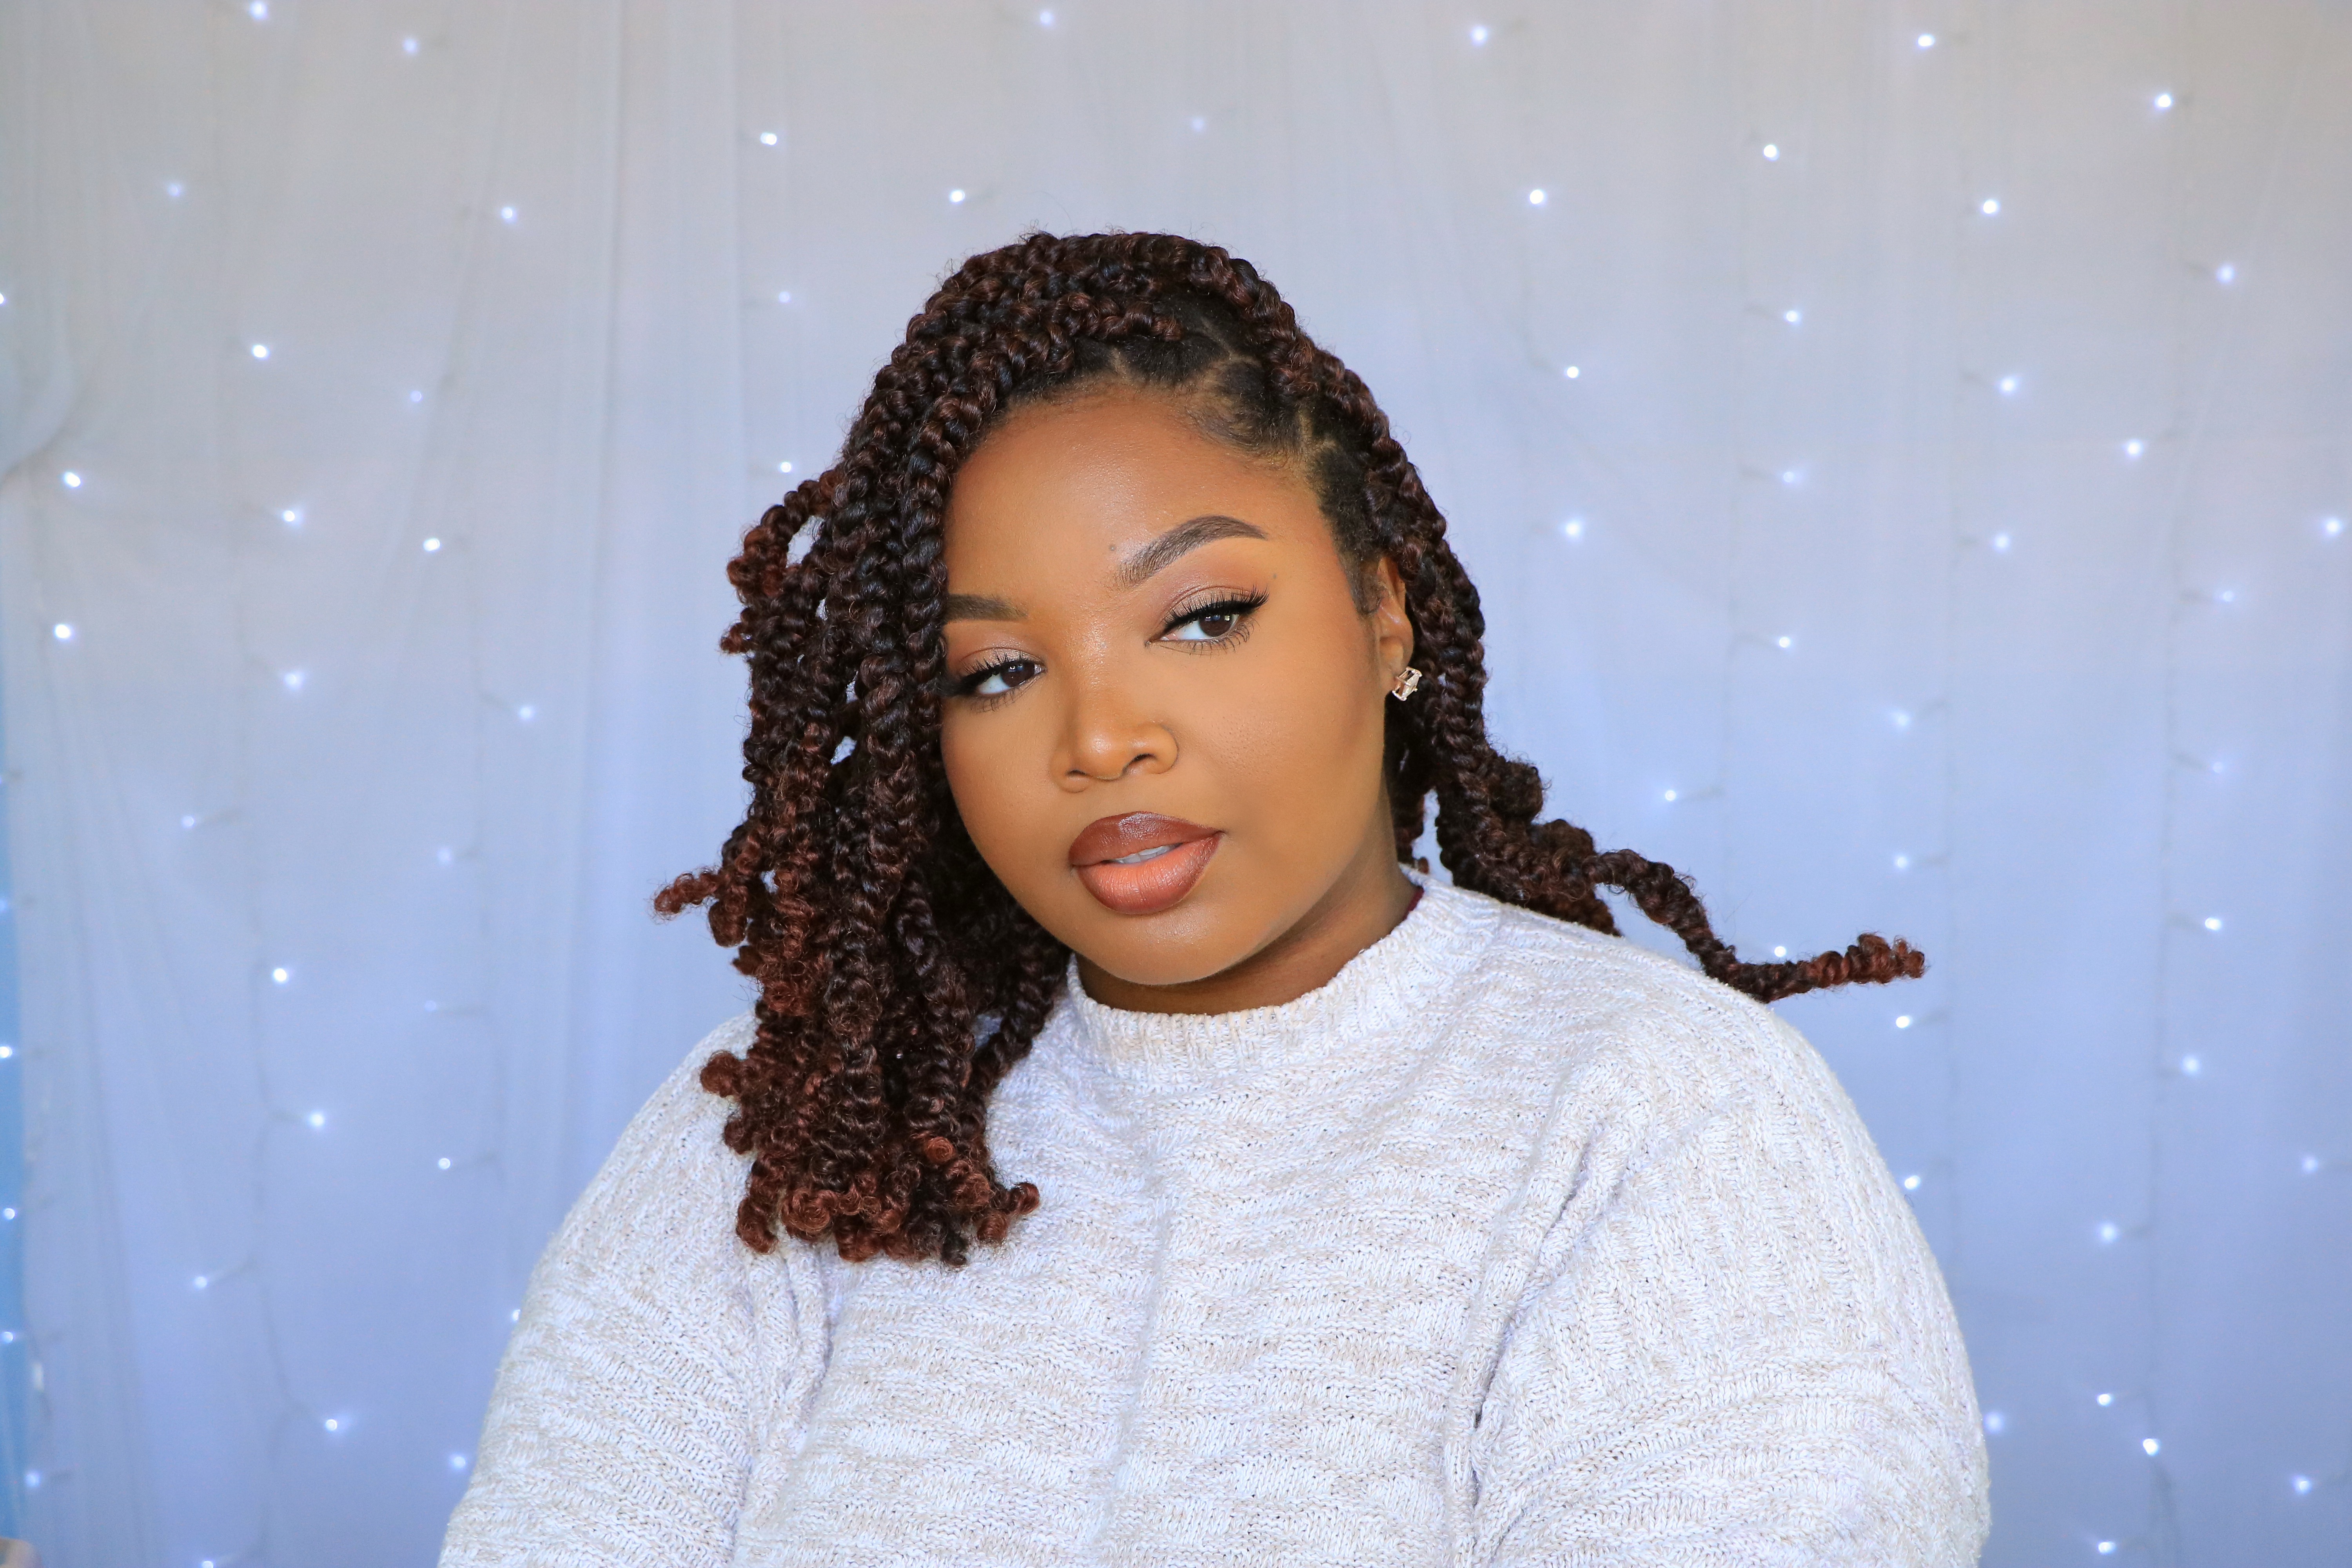 Diy Natural Hairstyles For The Holidays As Told By Hair Expert Obeautiful